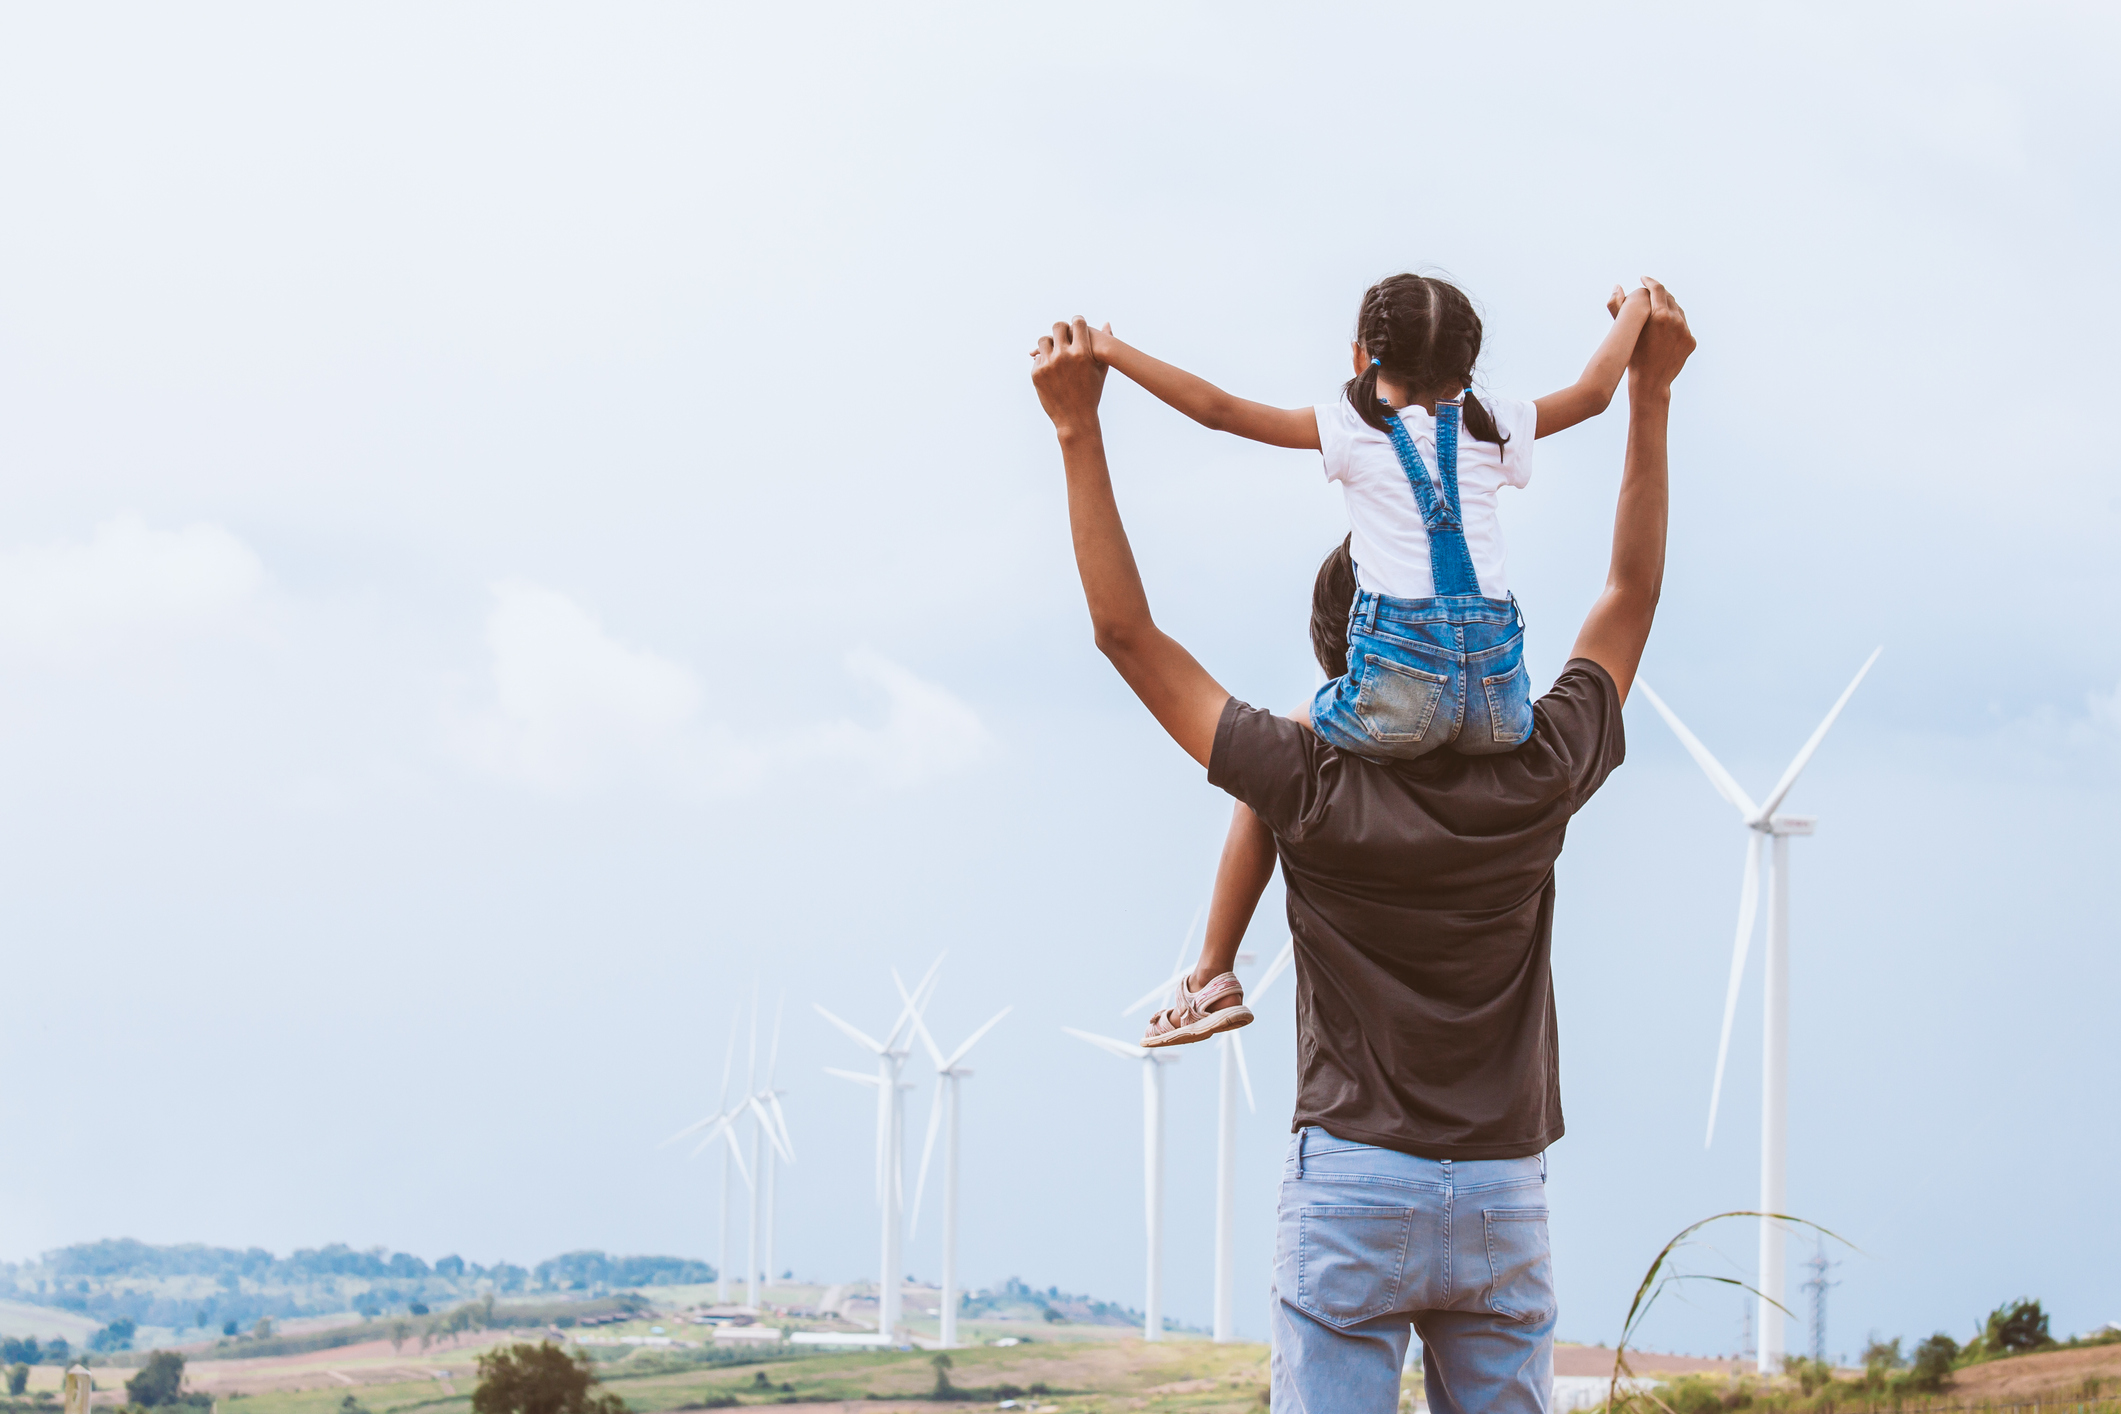 A daughter sits on her father's shoulders looking out over a wind farm